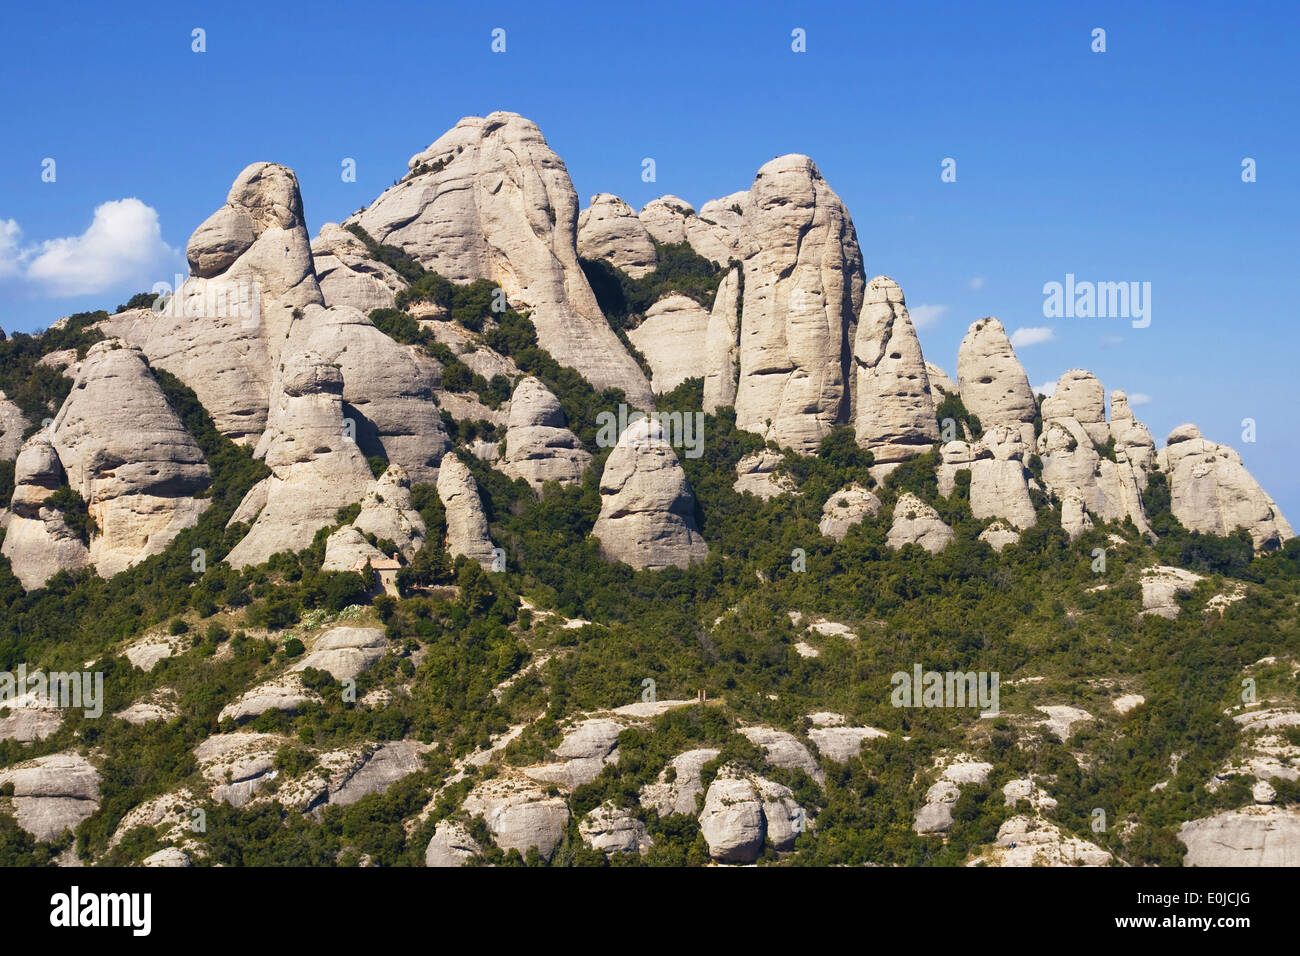 View of the rock formations of Montserrat Mountain in Catalonia. Stock Photo